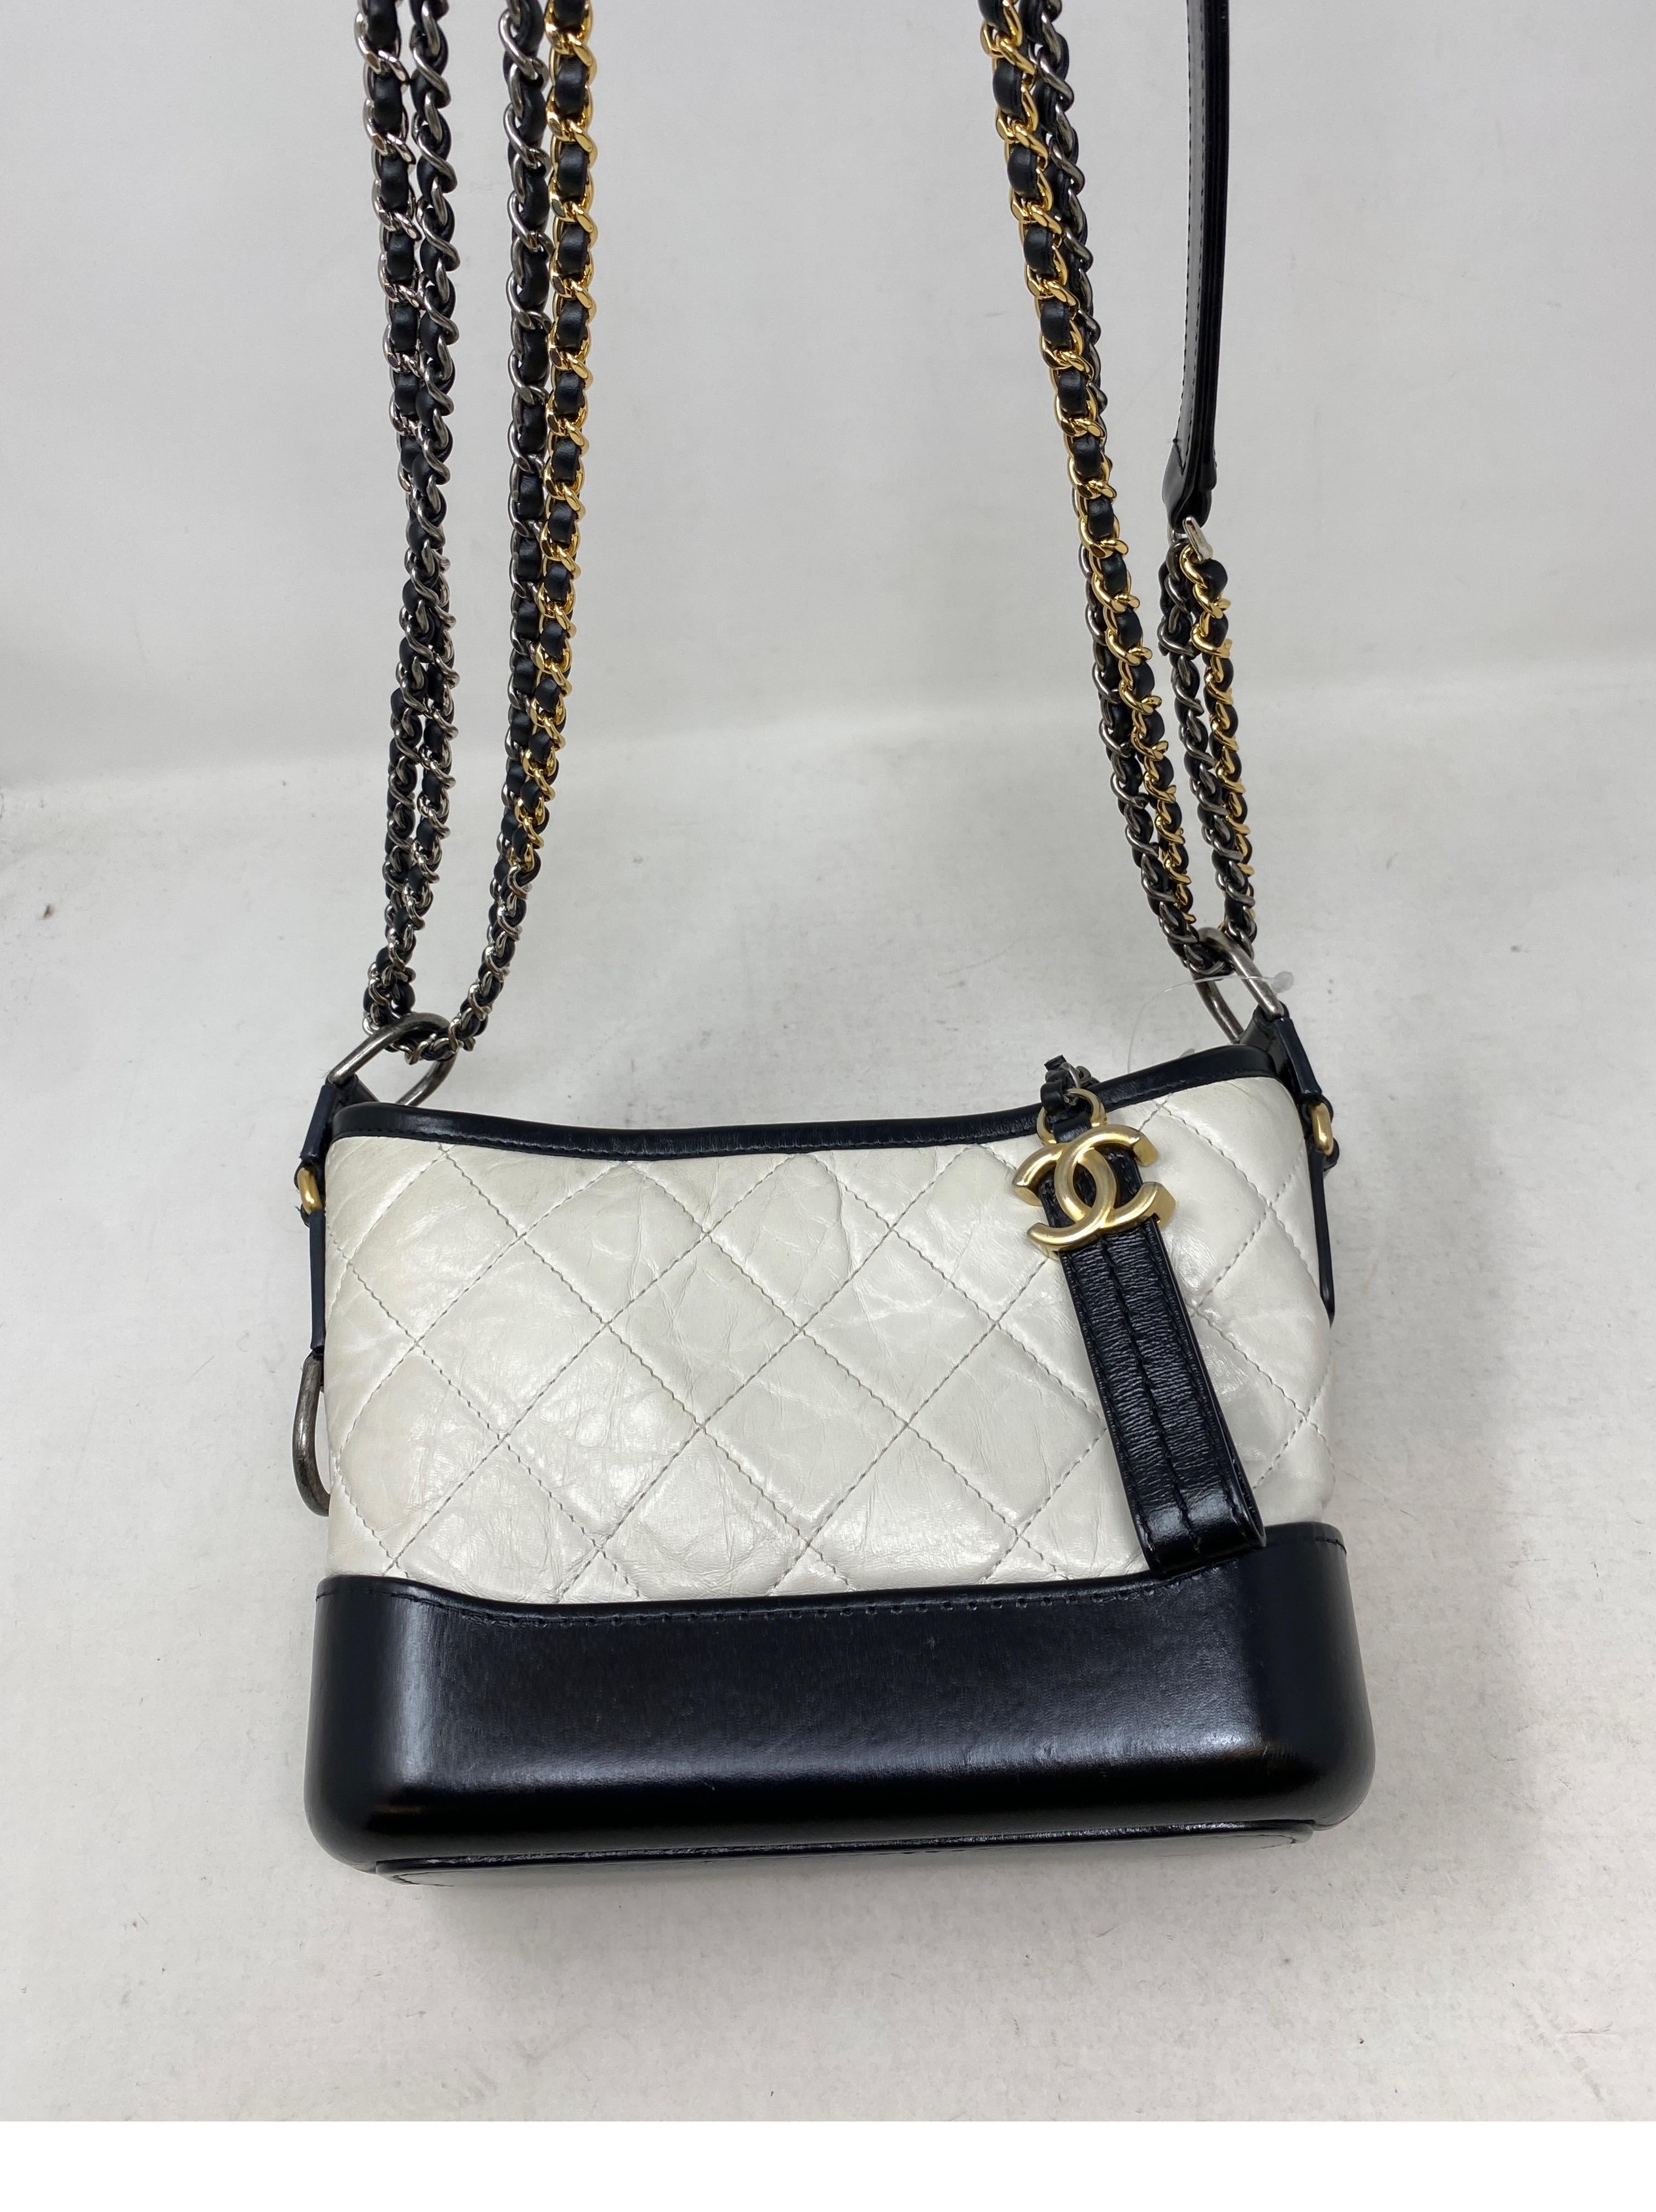 Women's or Men's Chanel White and Black Gabrielle Bag 